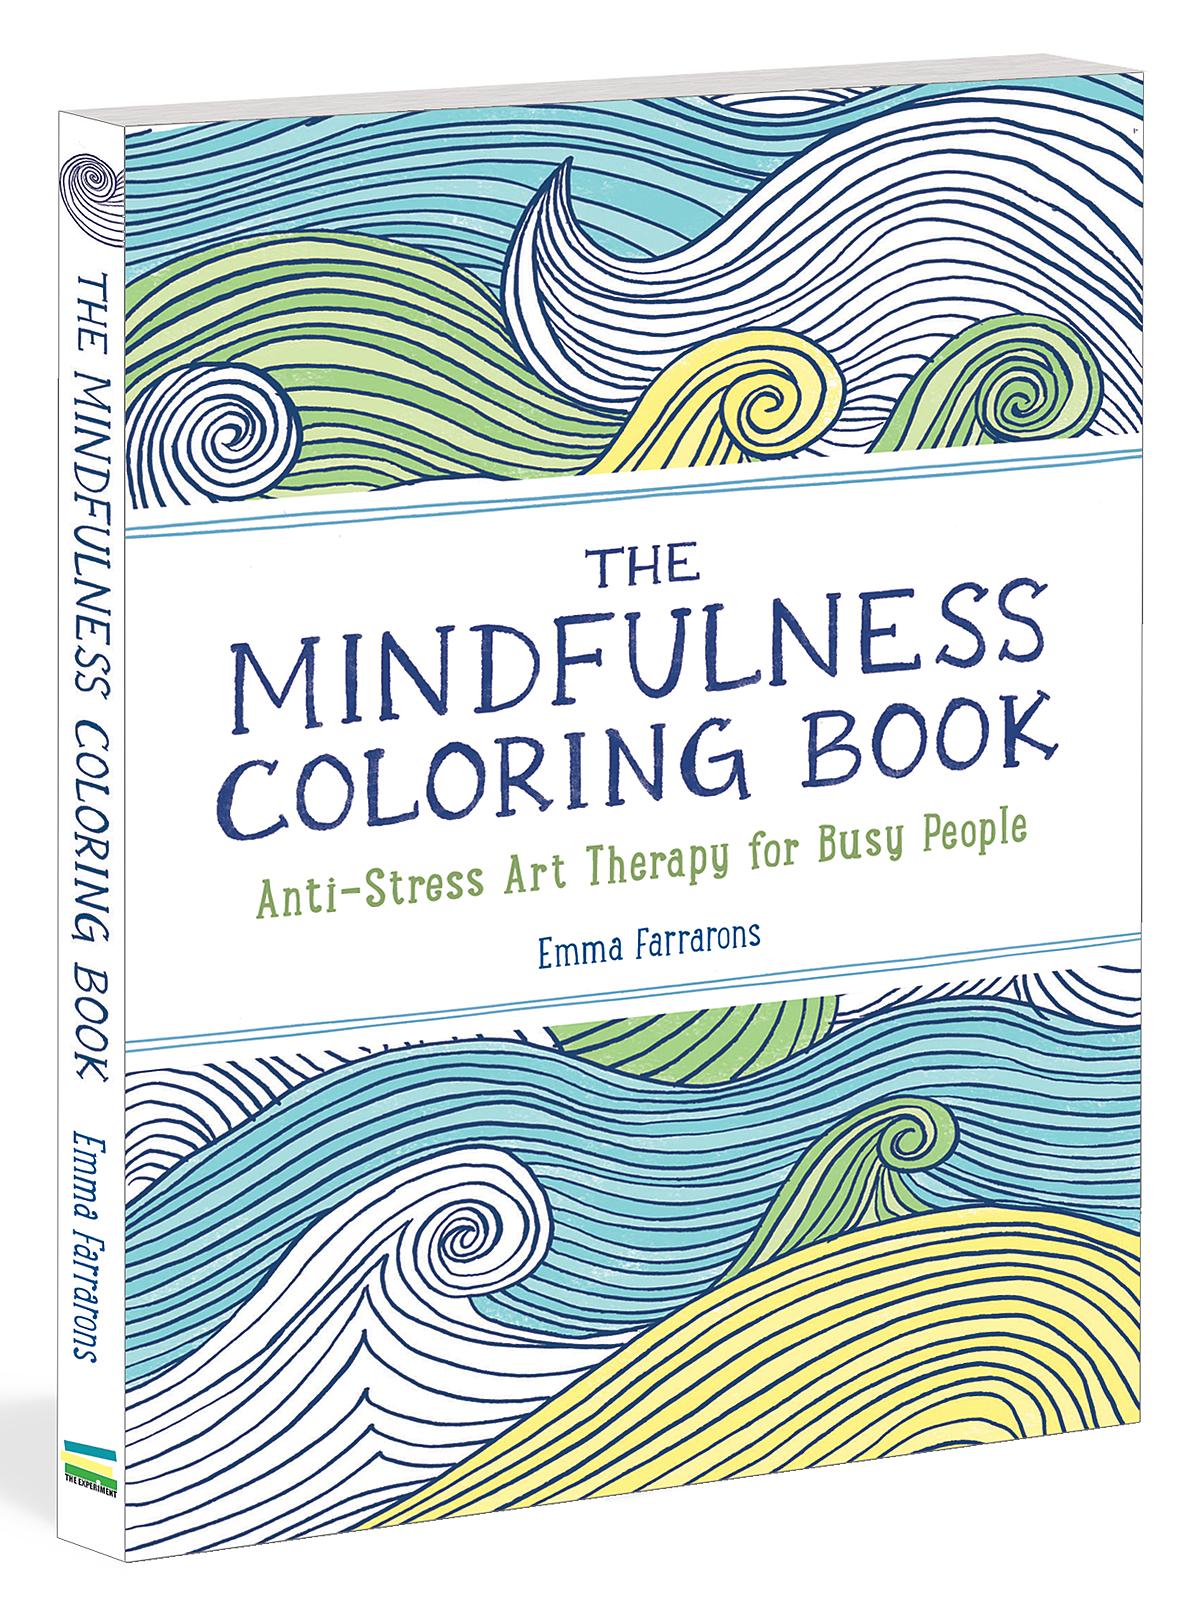 The Mindfulness Coloring Book Volume 1